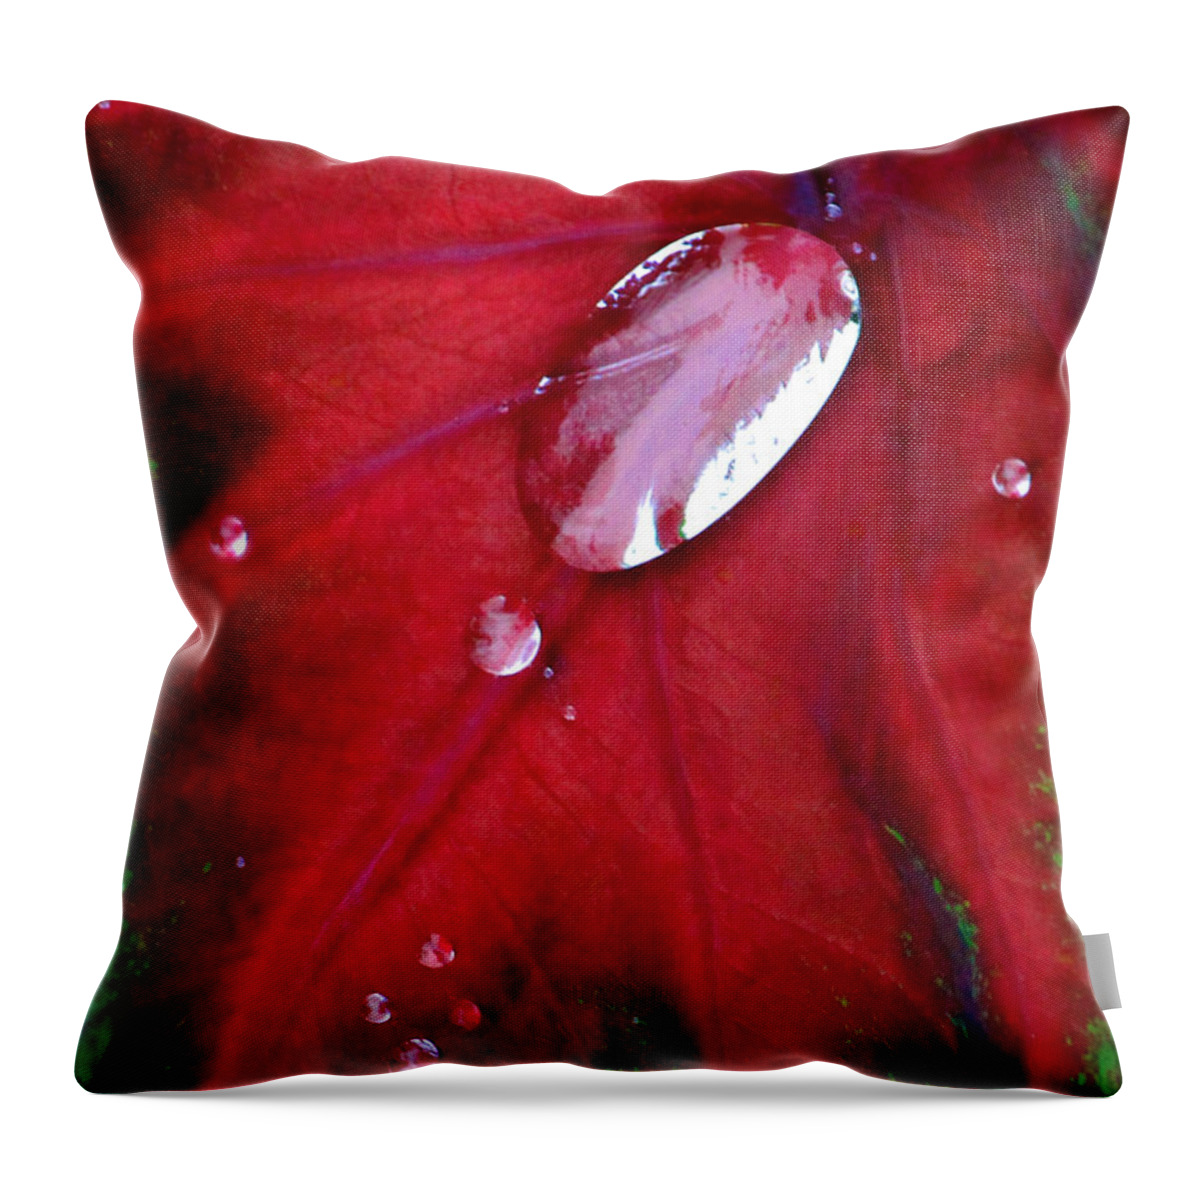 Coleus Throw Pillow featuring the photograph Red Coleus Leaf by Jeanette C Landstrom